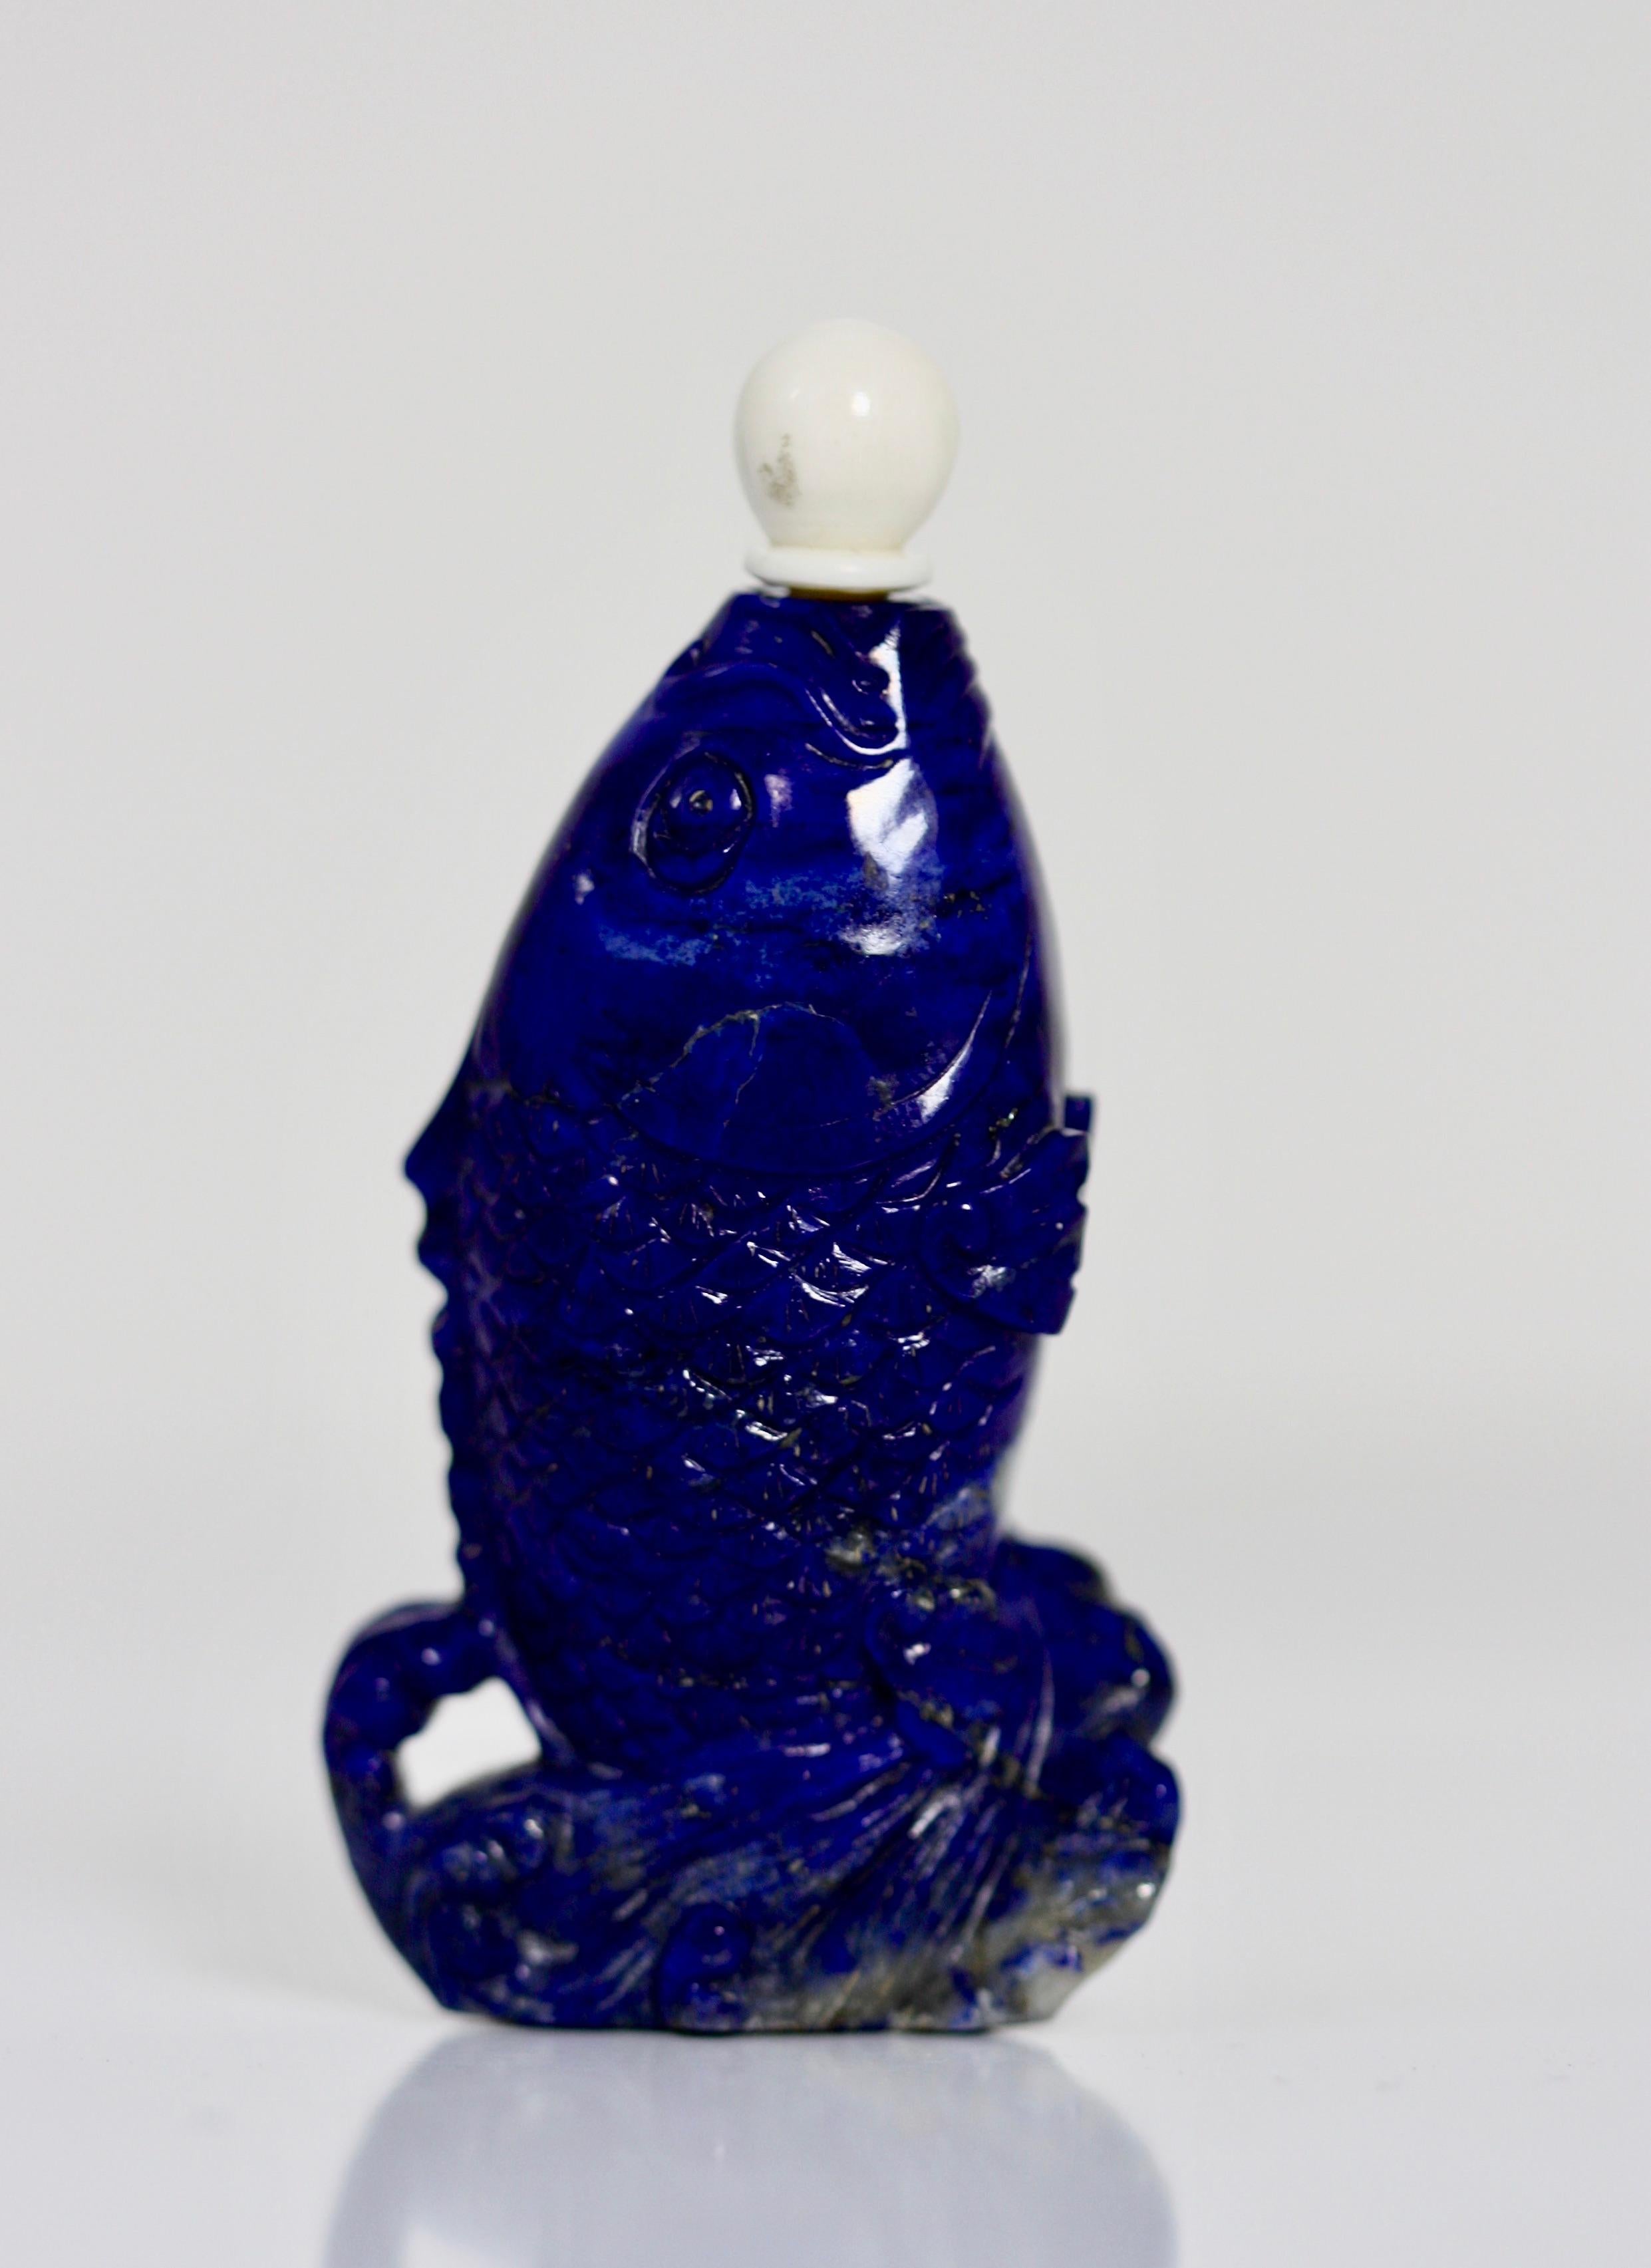 A Lapis Lazuli snuff bottle
Chinese,
carved in the form of a fish, has stopper
Measures: Height 2.5 in. (6.5 cm.).